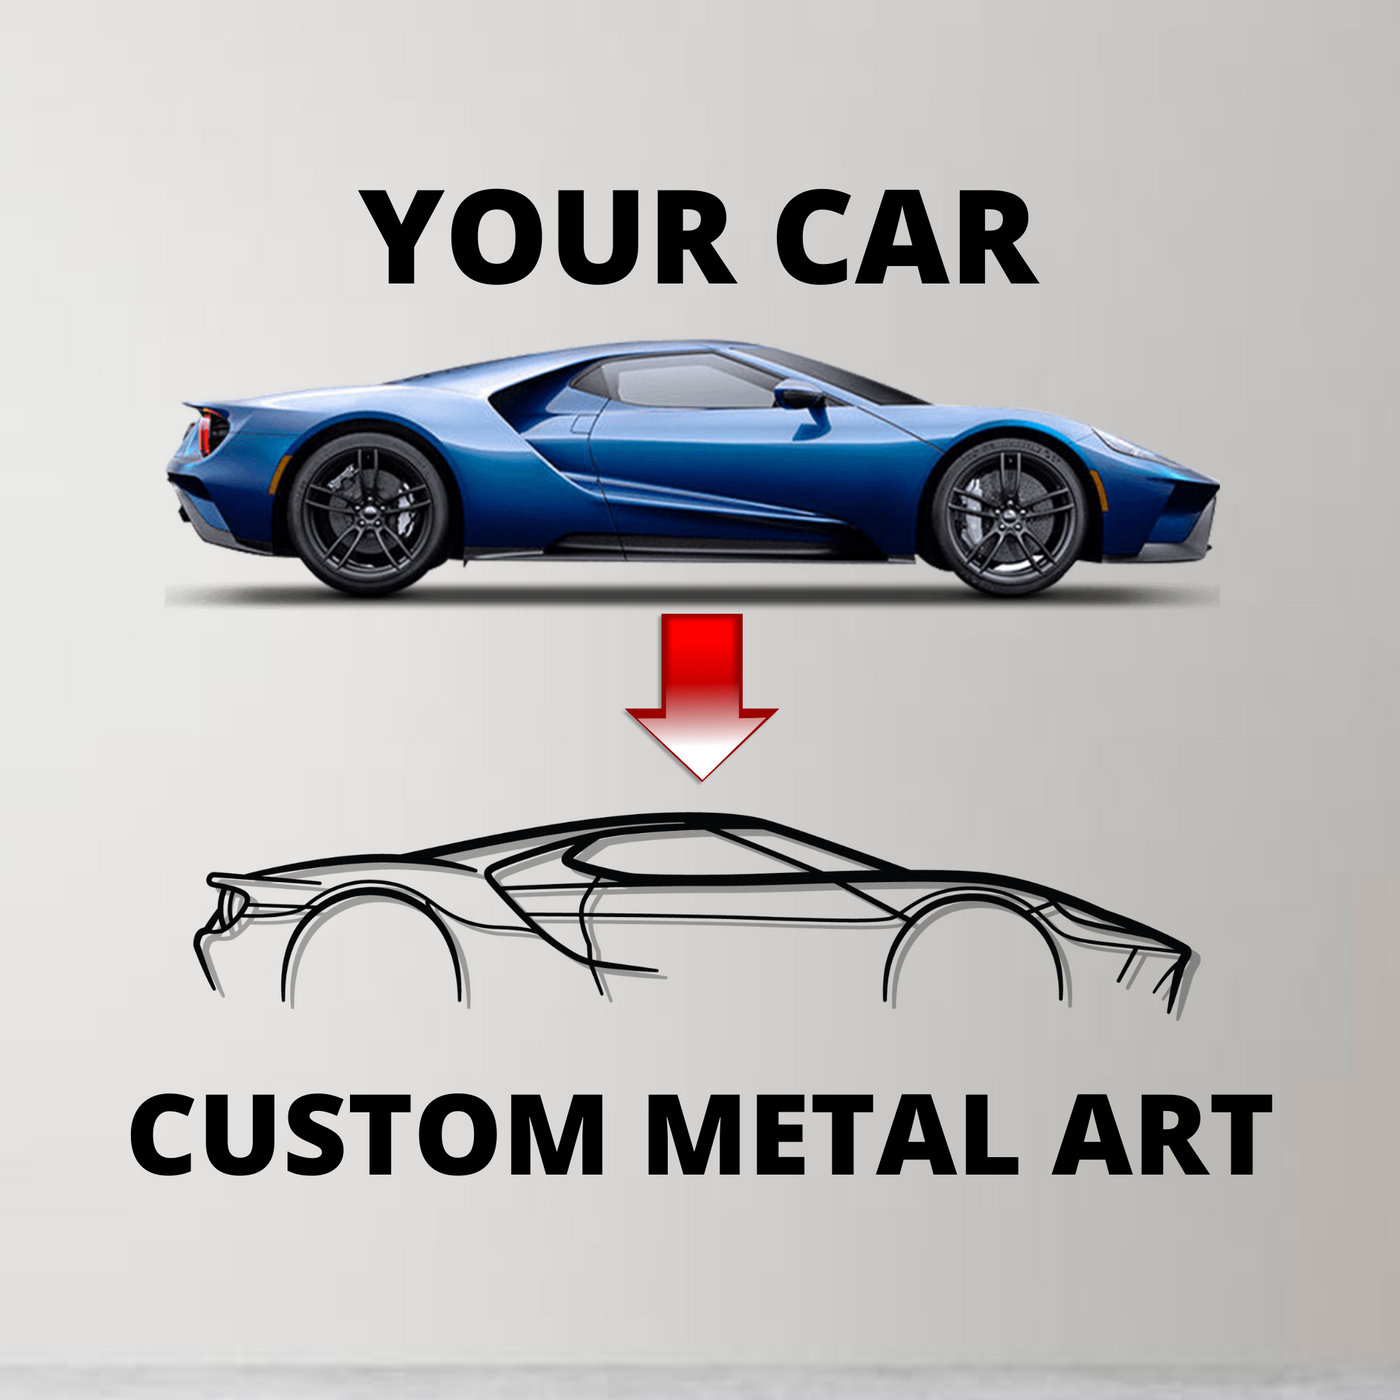 356 Coupe Detailed Silhouette Metal Wall Art